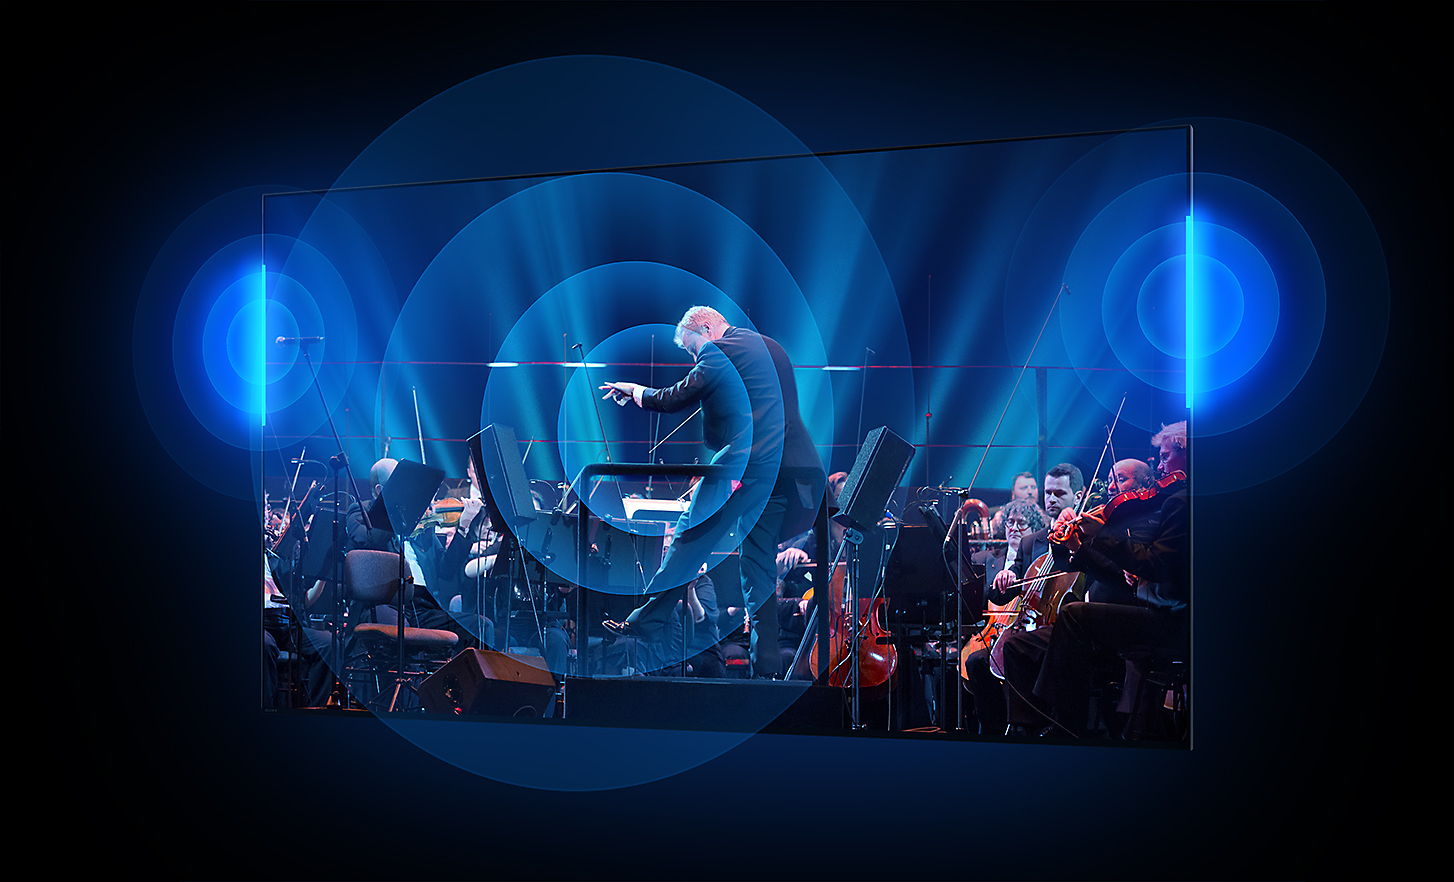 BRAVIA TV screen showing conductor and orchestra with sound waves radiating out in concentric rings from the centre of the screen